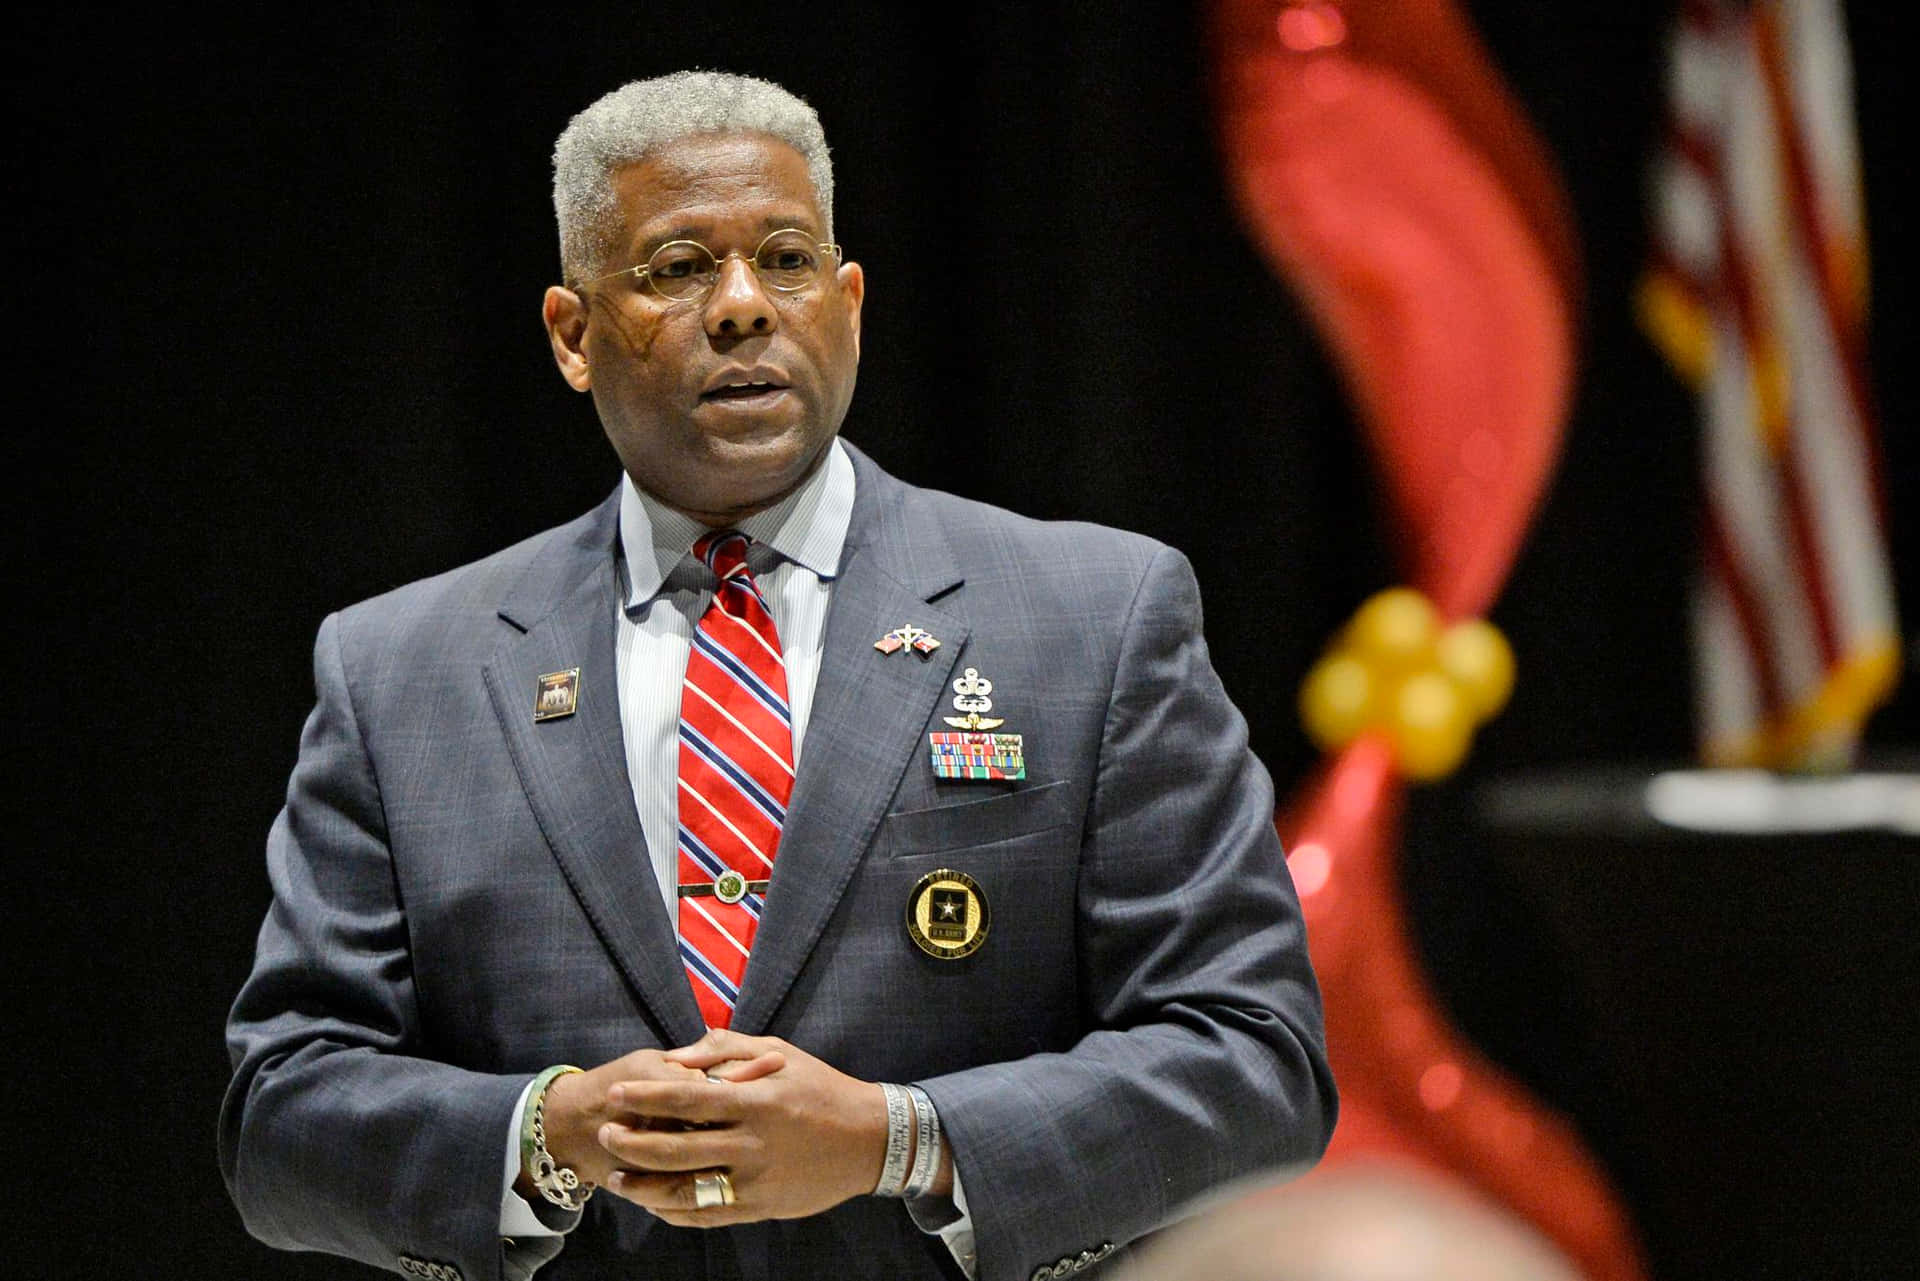 Allen West With Military Star Badge Wallpaper